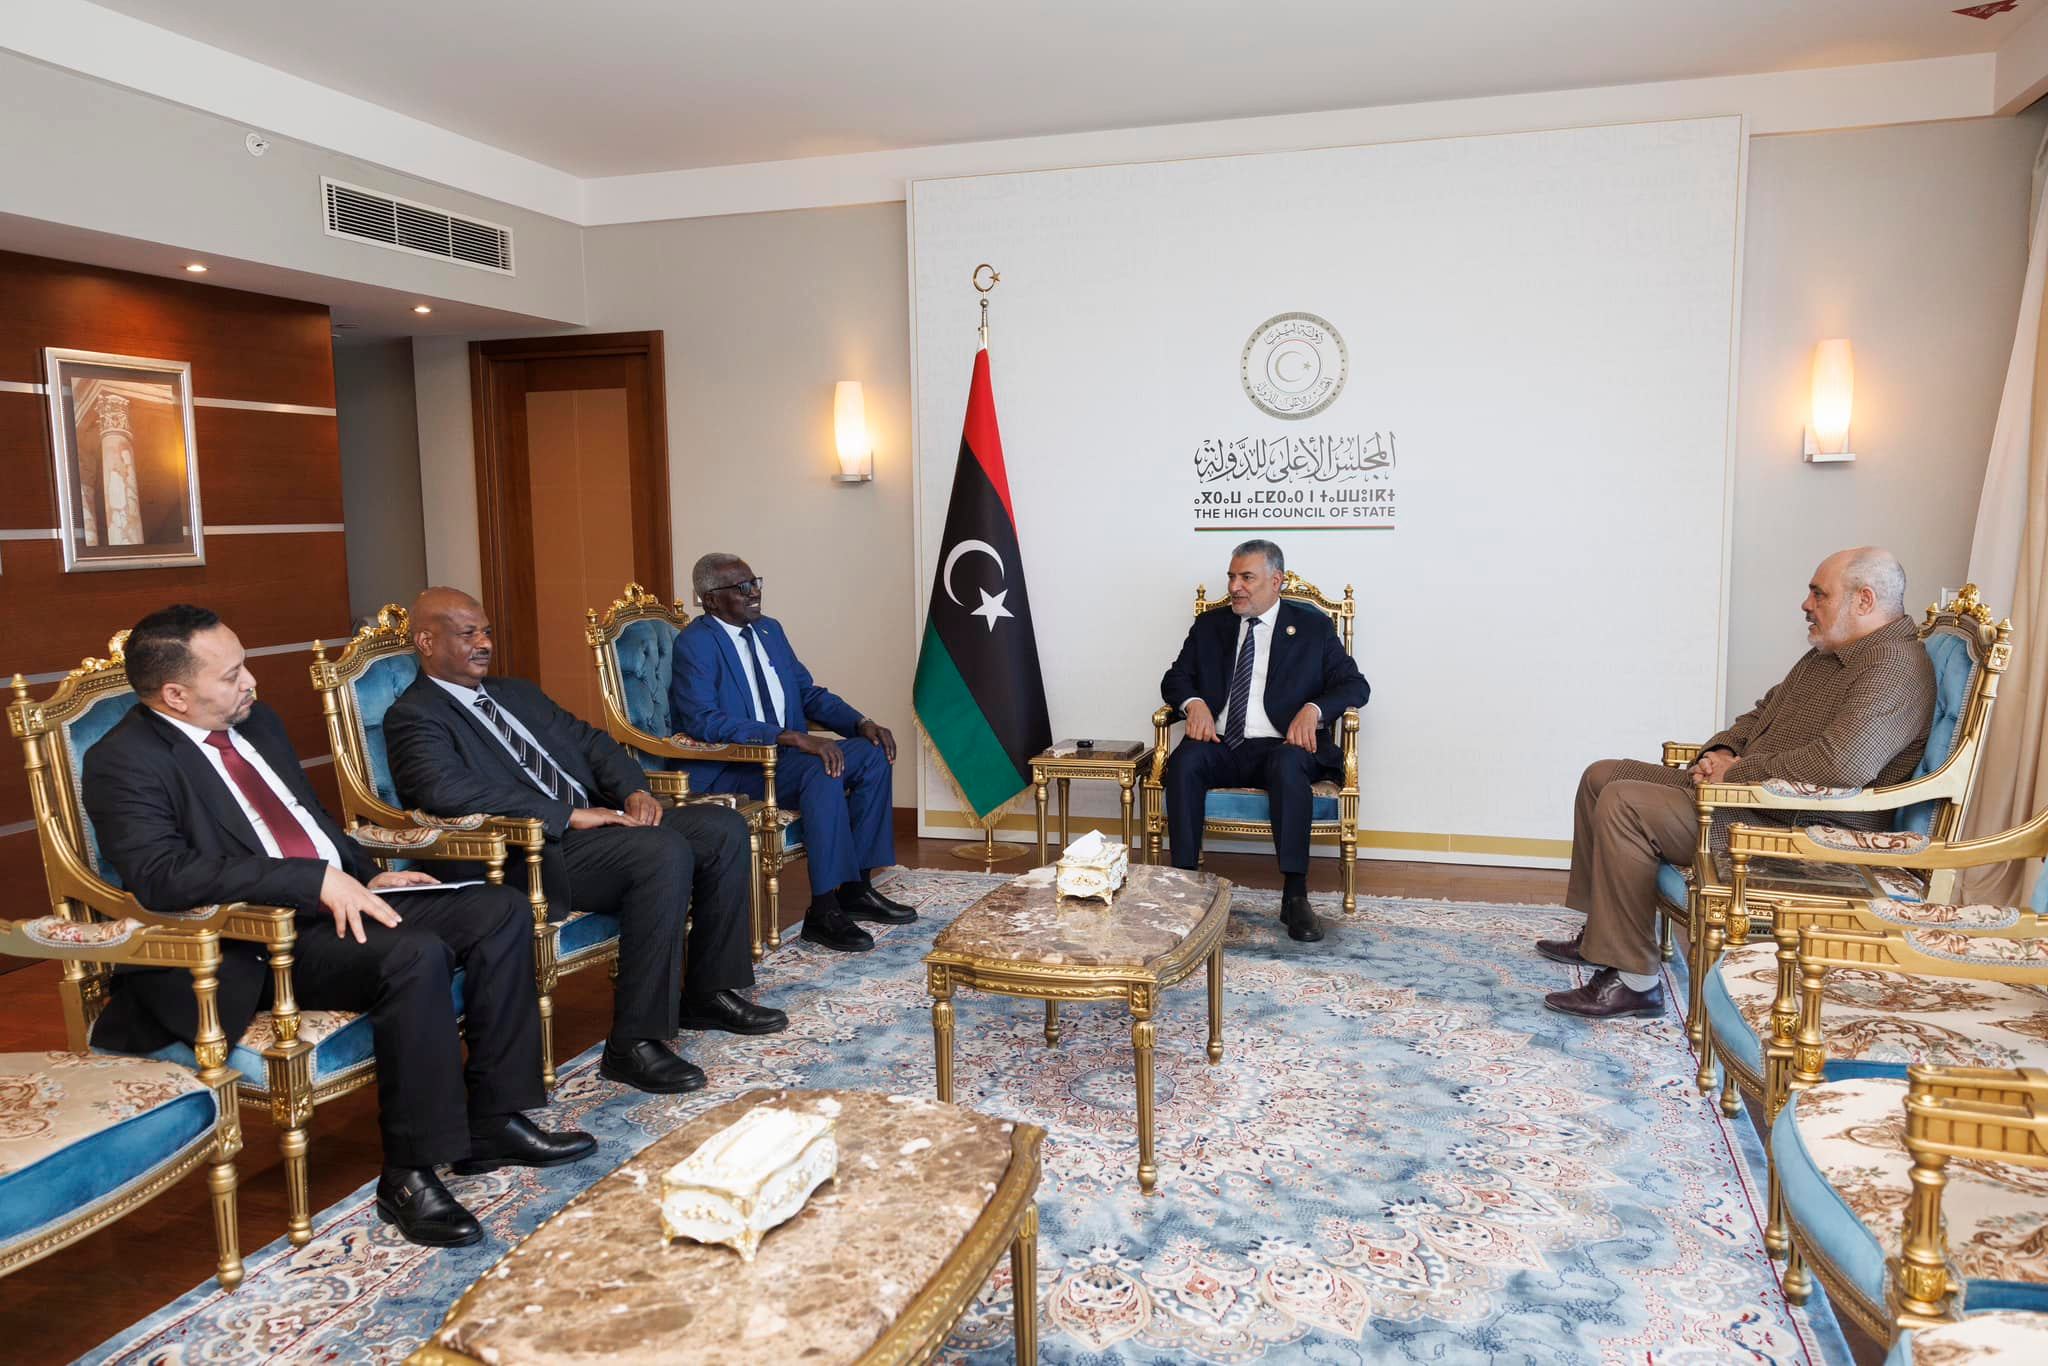 The President of the High Council of State meets with the Sudanese ambassador to Libya.